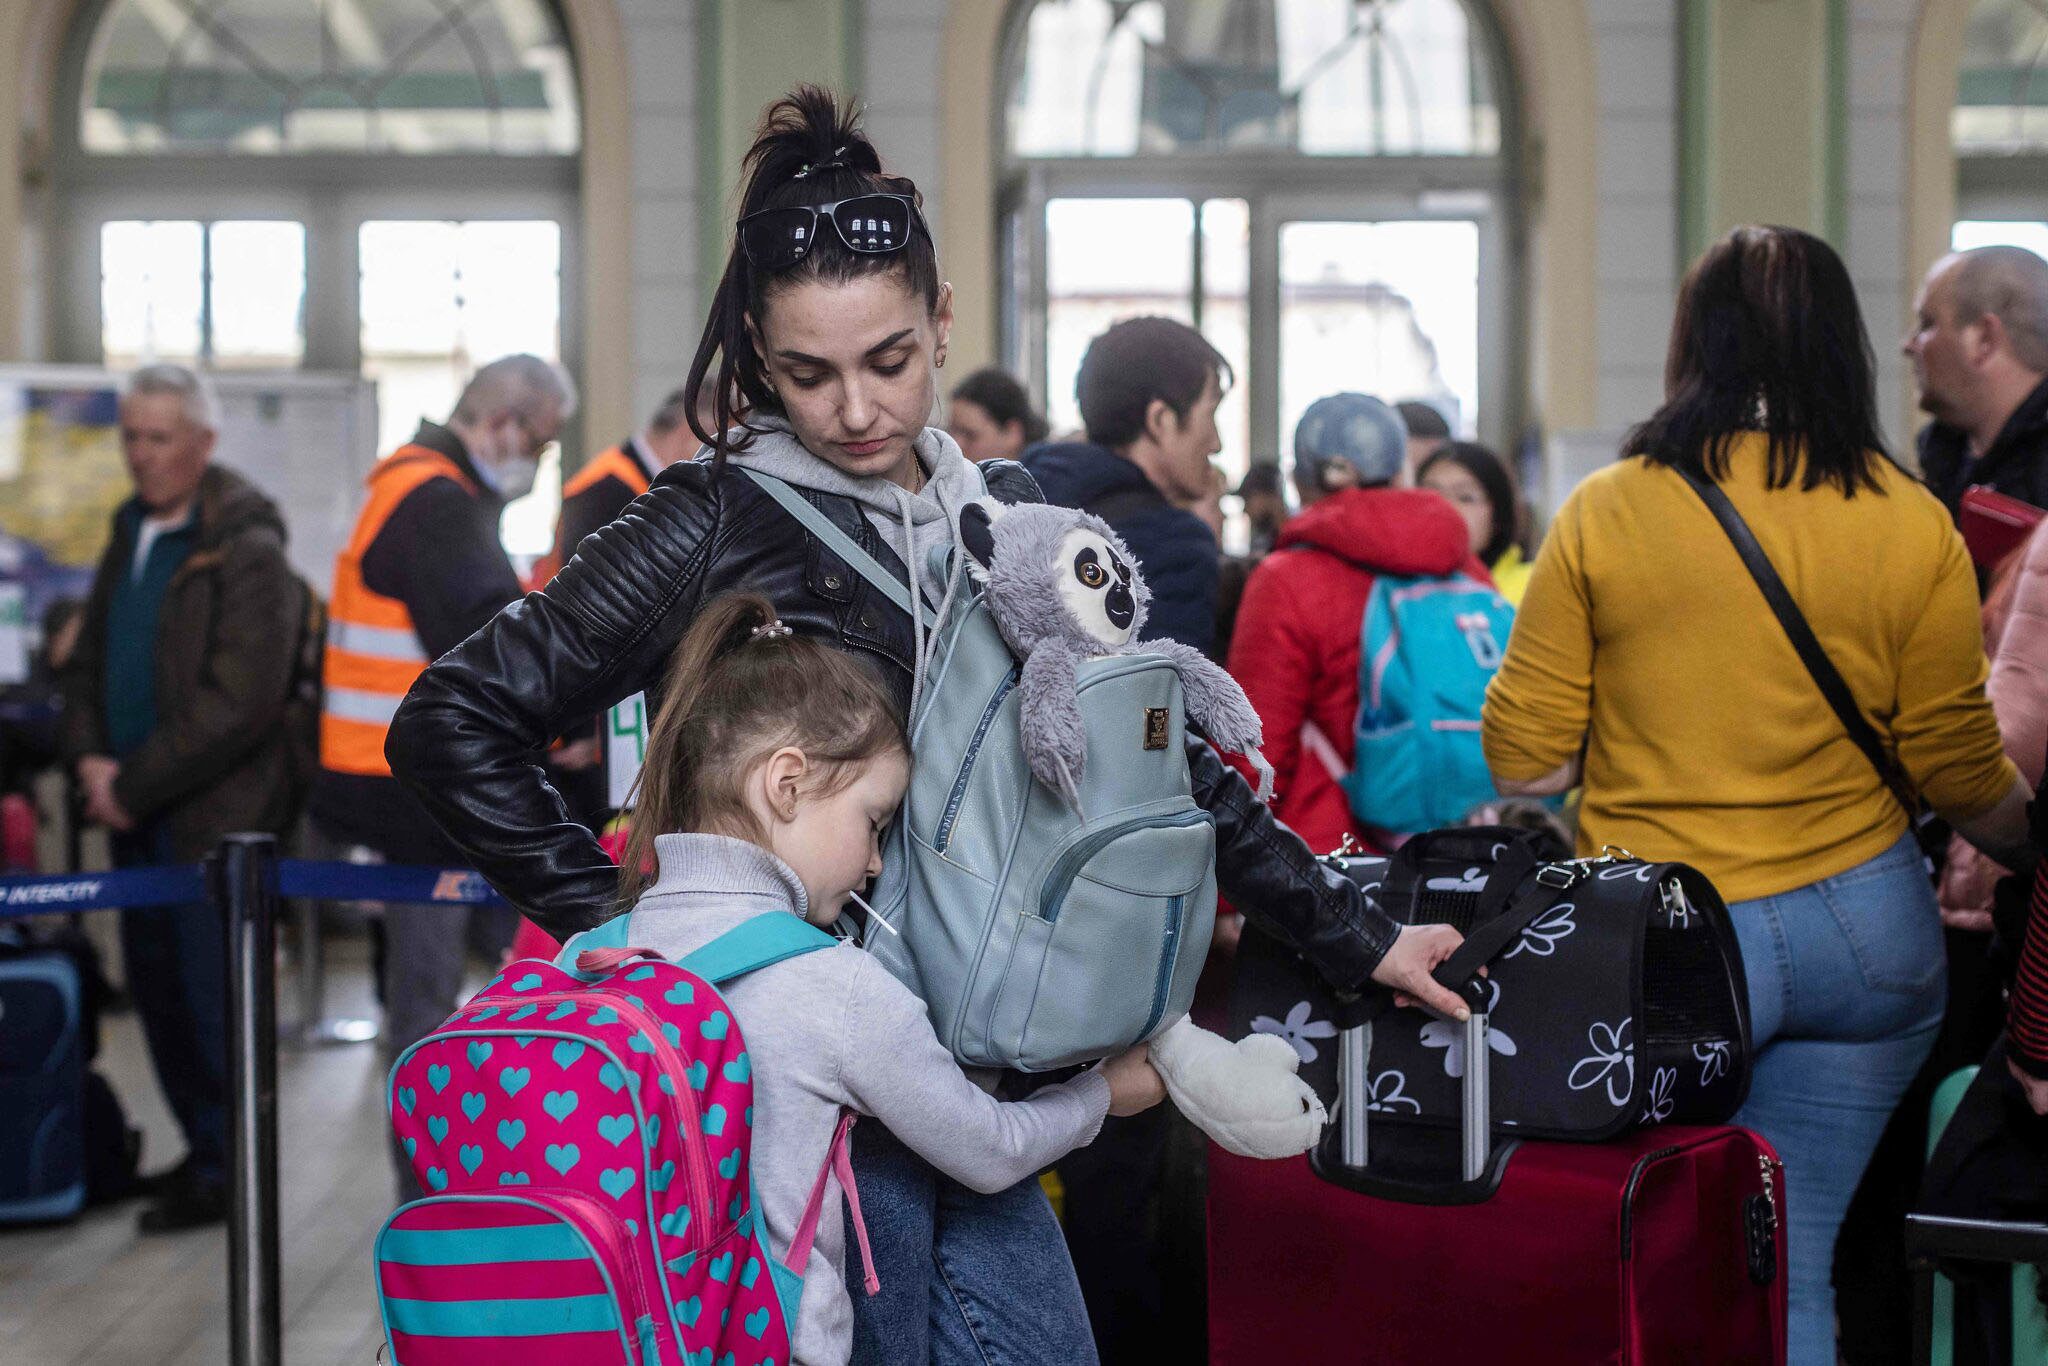 Refugee woman and her daughter with their bags at the train station.